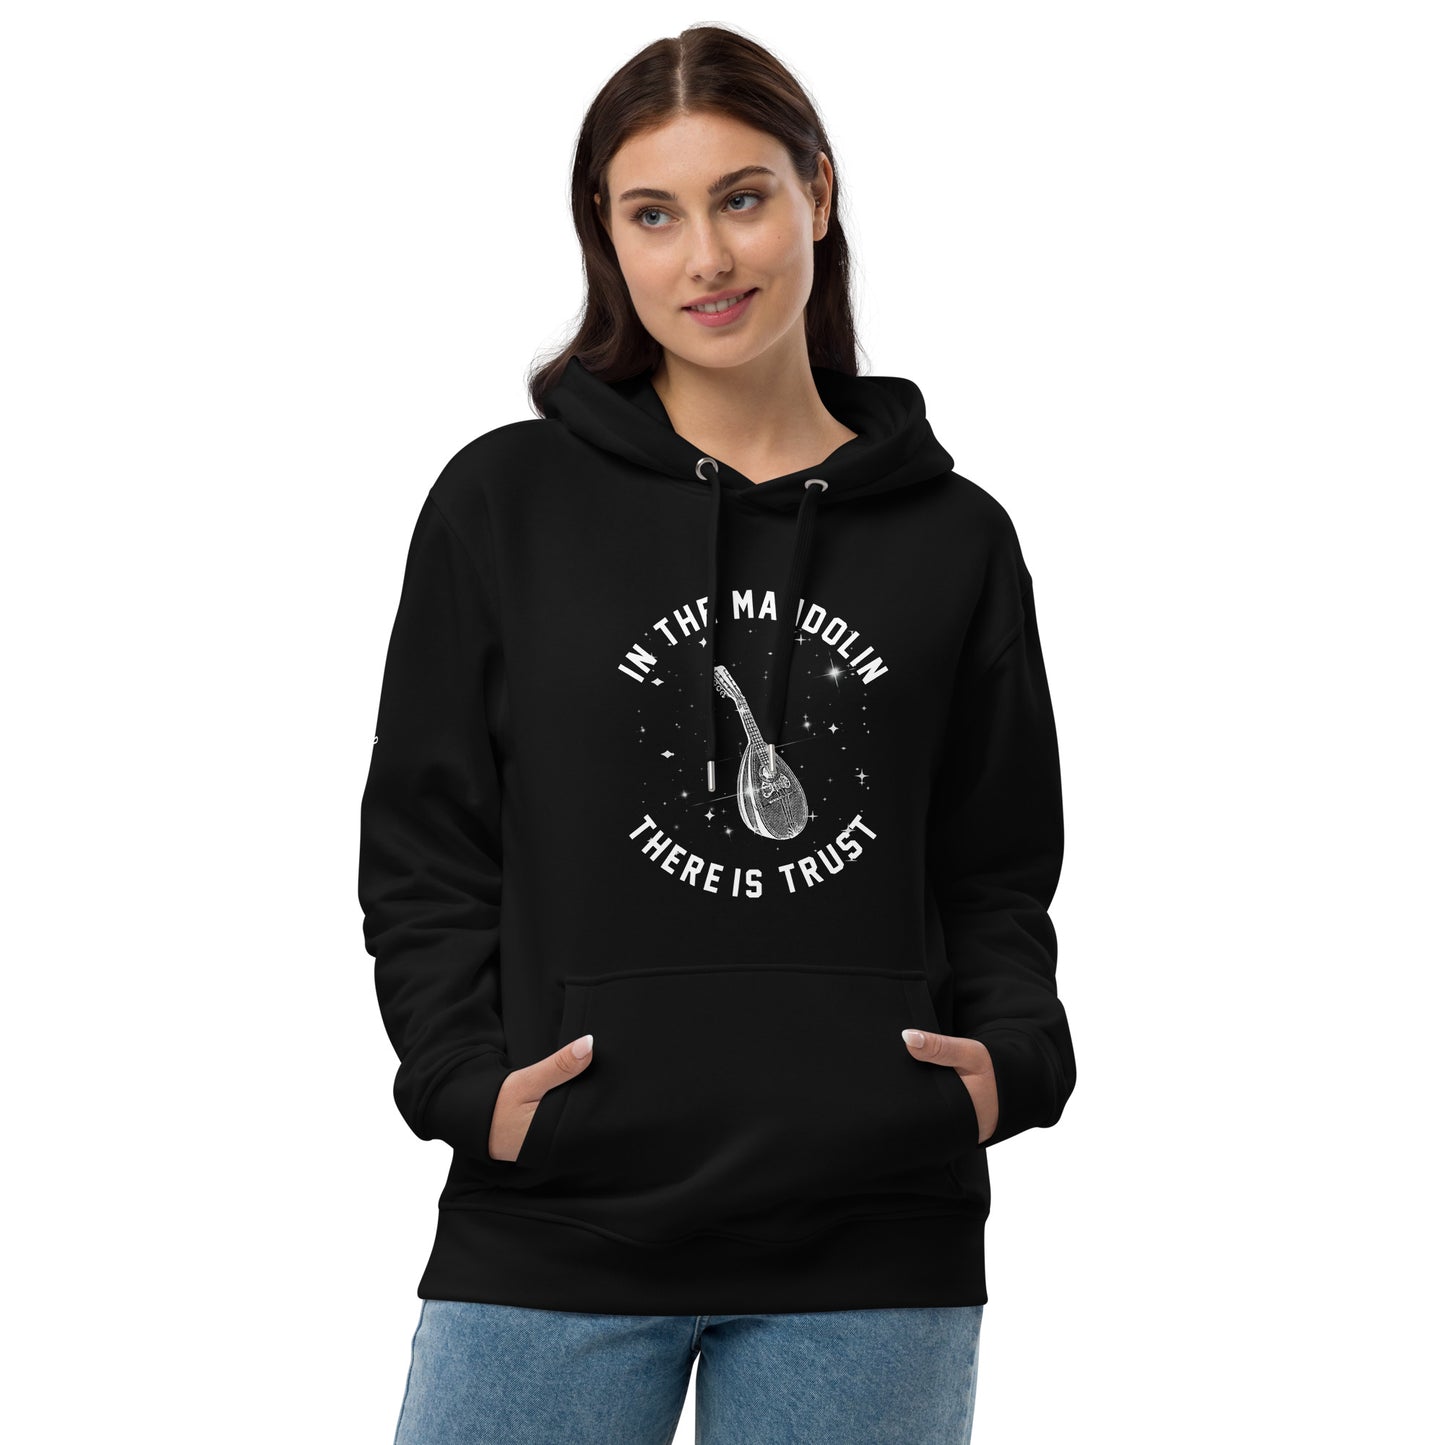 In the Mandolin There is Trust Original Hoodie